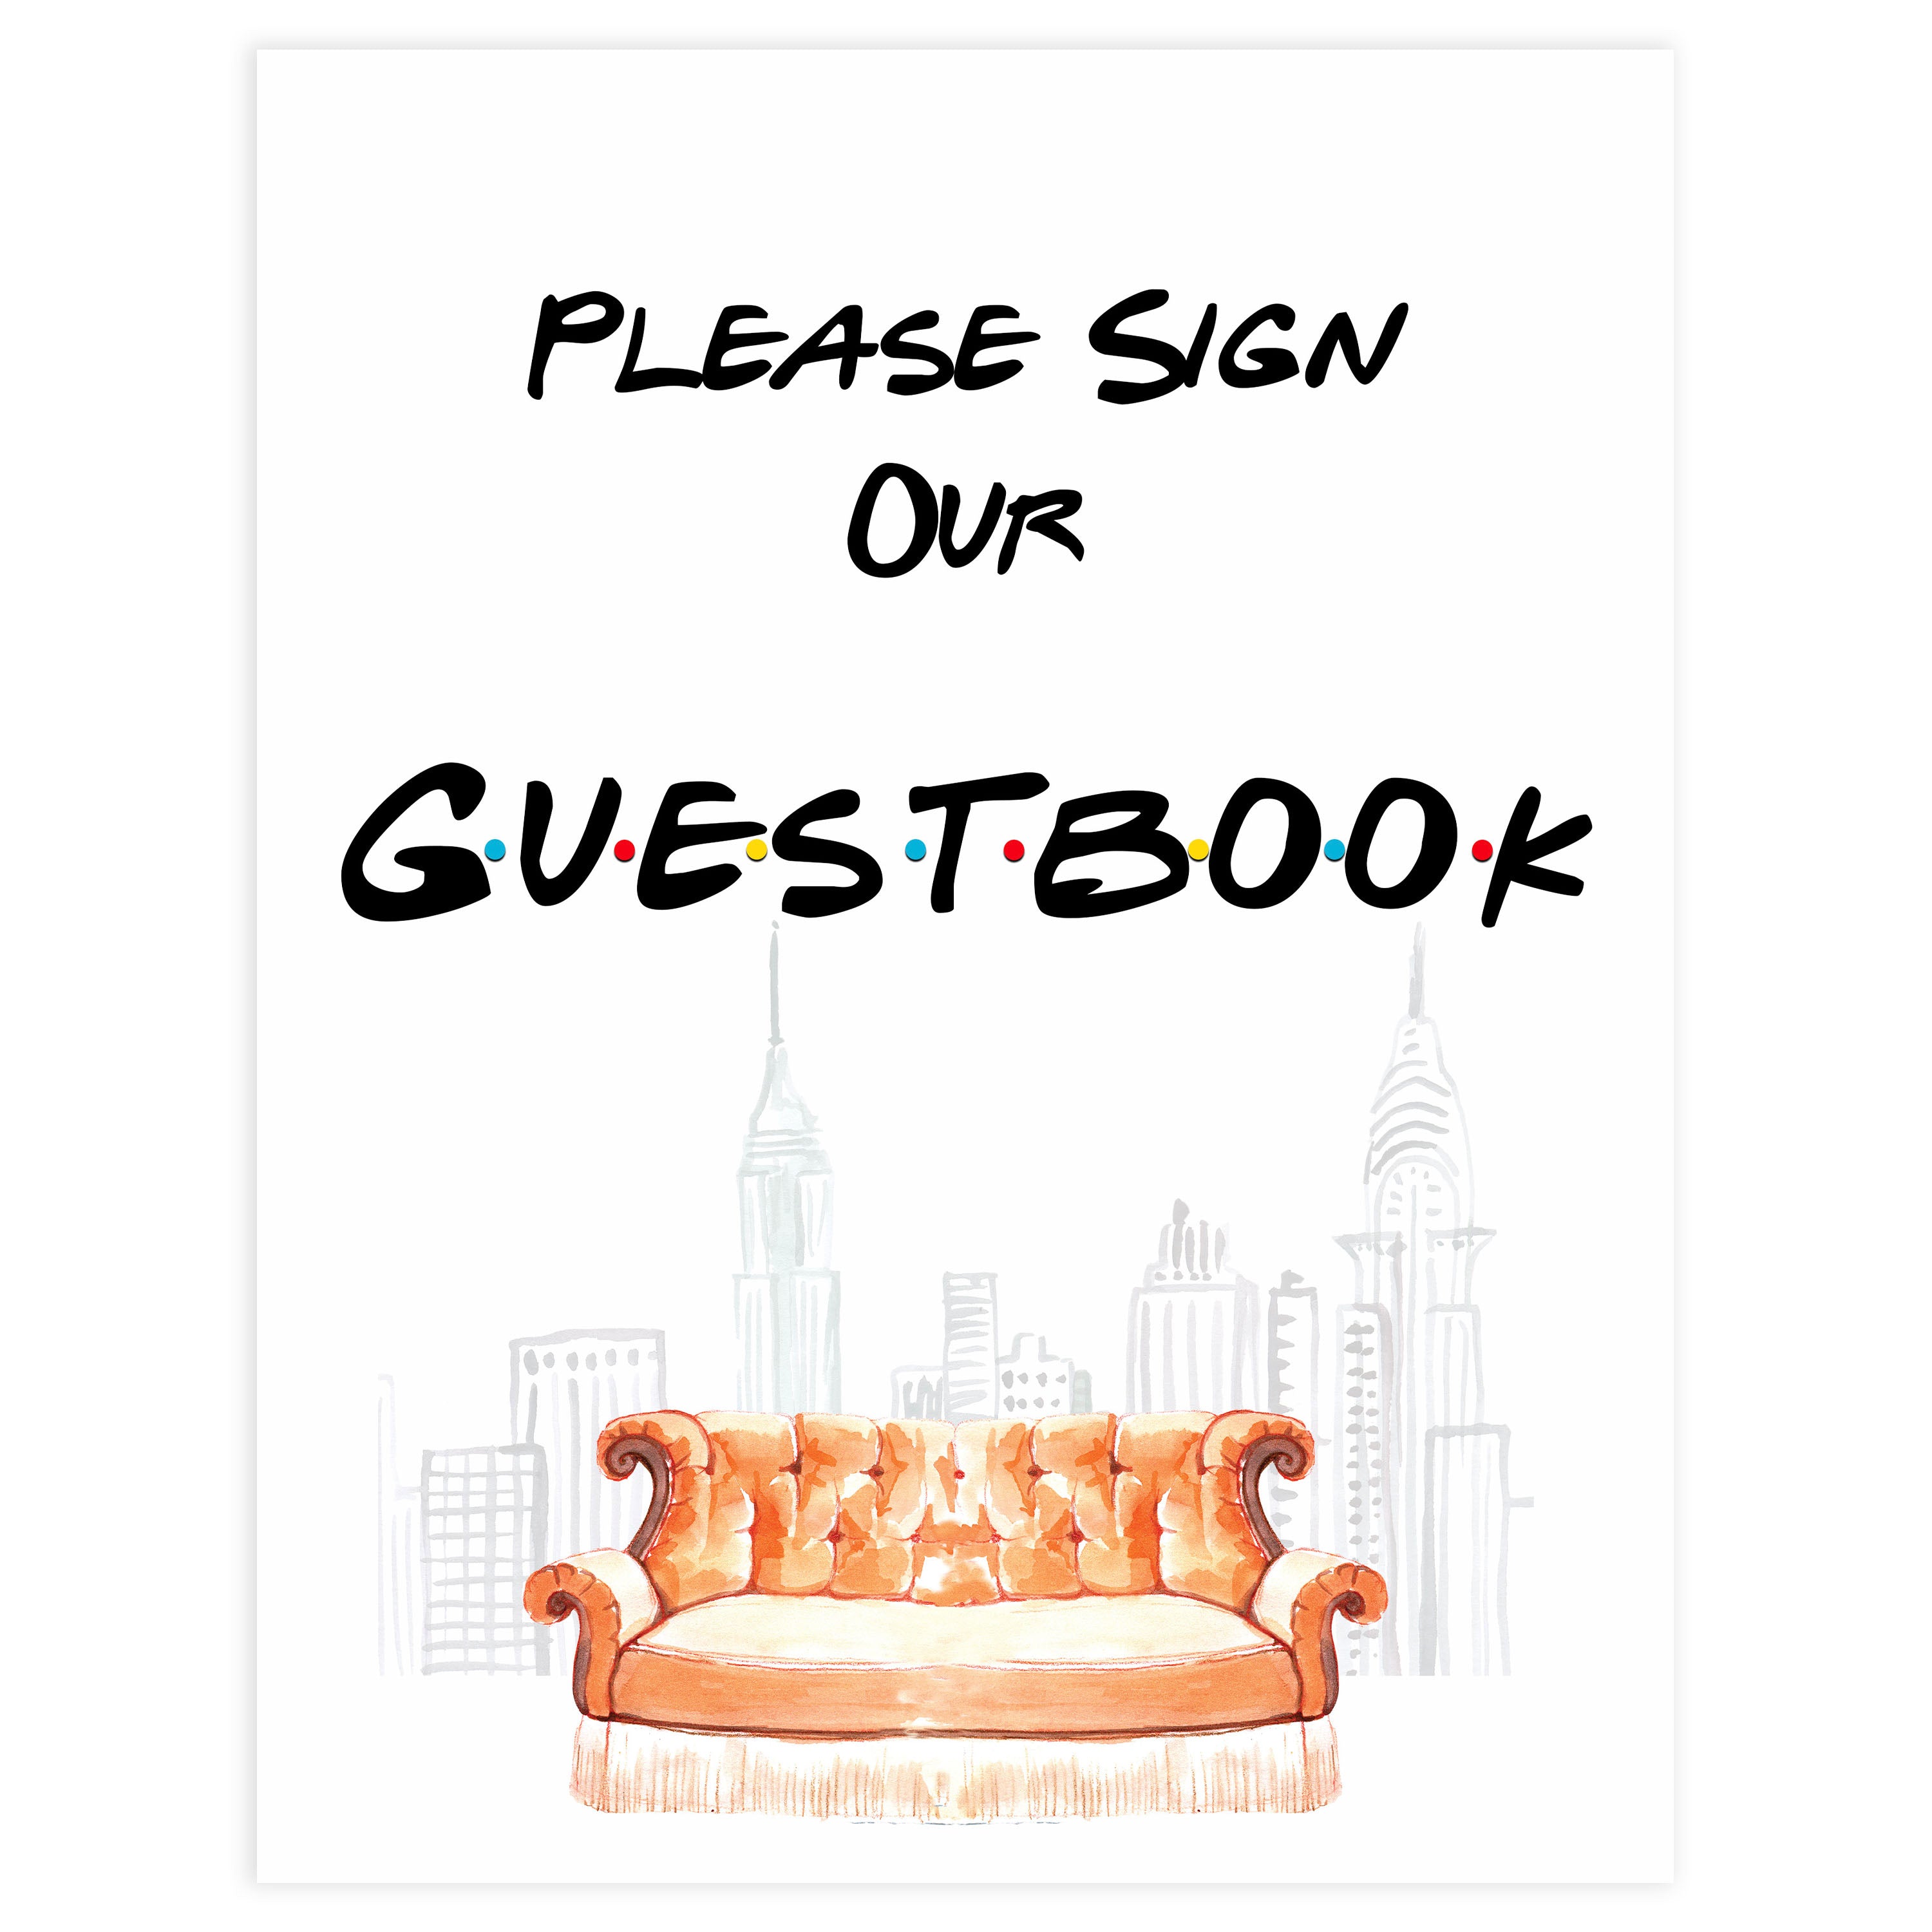 please sign our guestbook sign, guestbook sign, Printable bridal shower signs, friends bridal shower decor, friends bridal shower decor ideas, fun bridal shower decor, bridal shower game ideas, friends bridal shower ideas